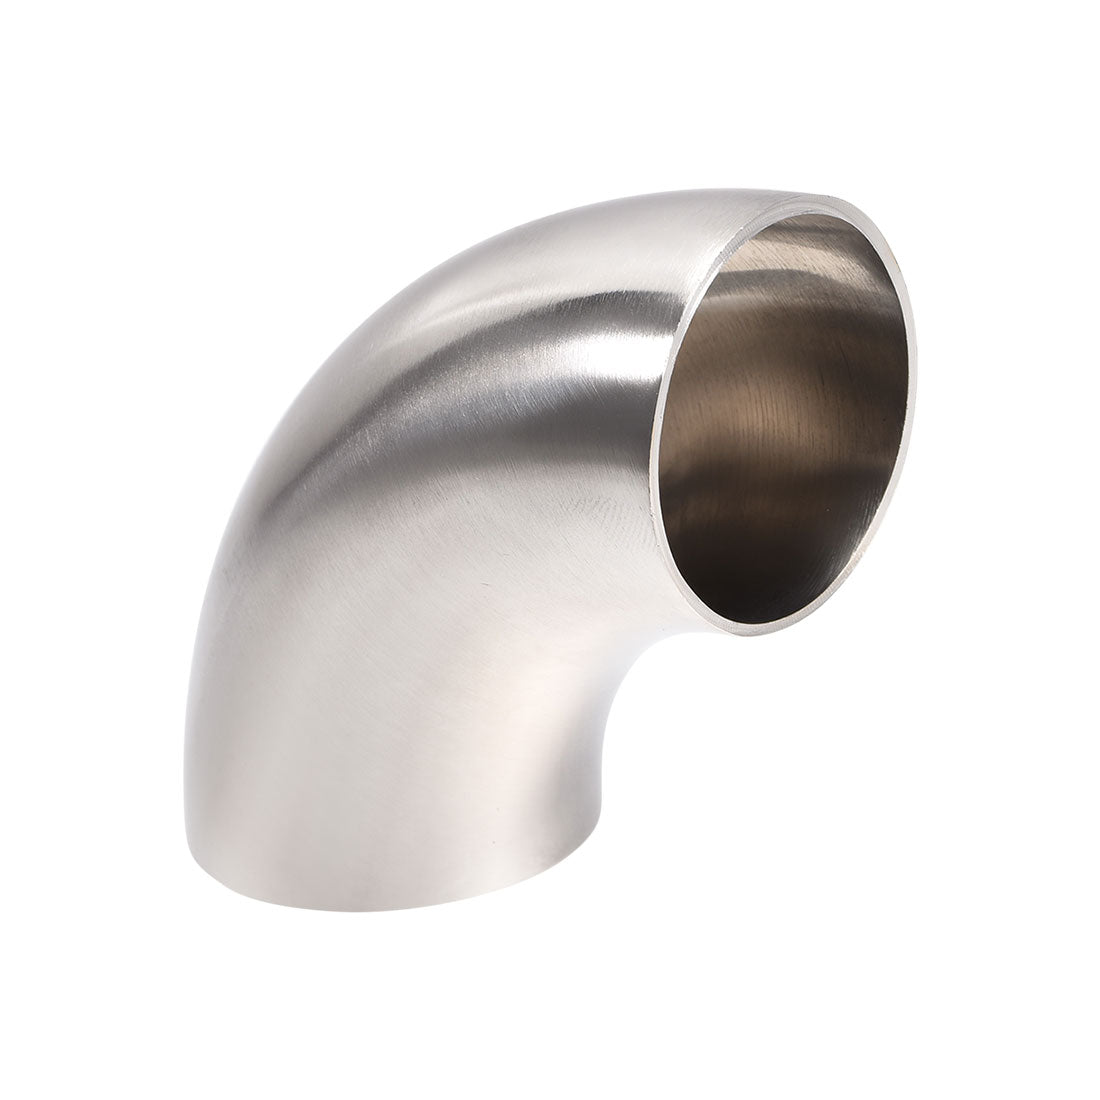 uxcell Uxcell Stainless Steel 304 Vacuum Fitting Elbow 90 Degree Polished 1.5 Inch Tube OD